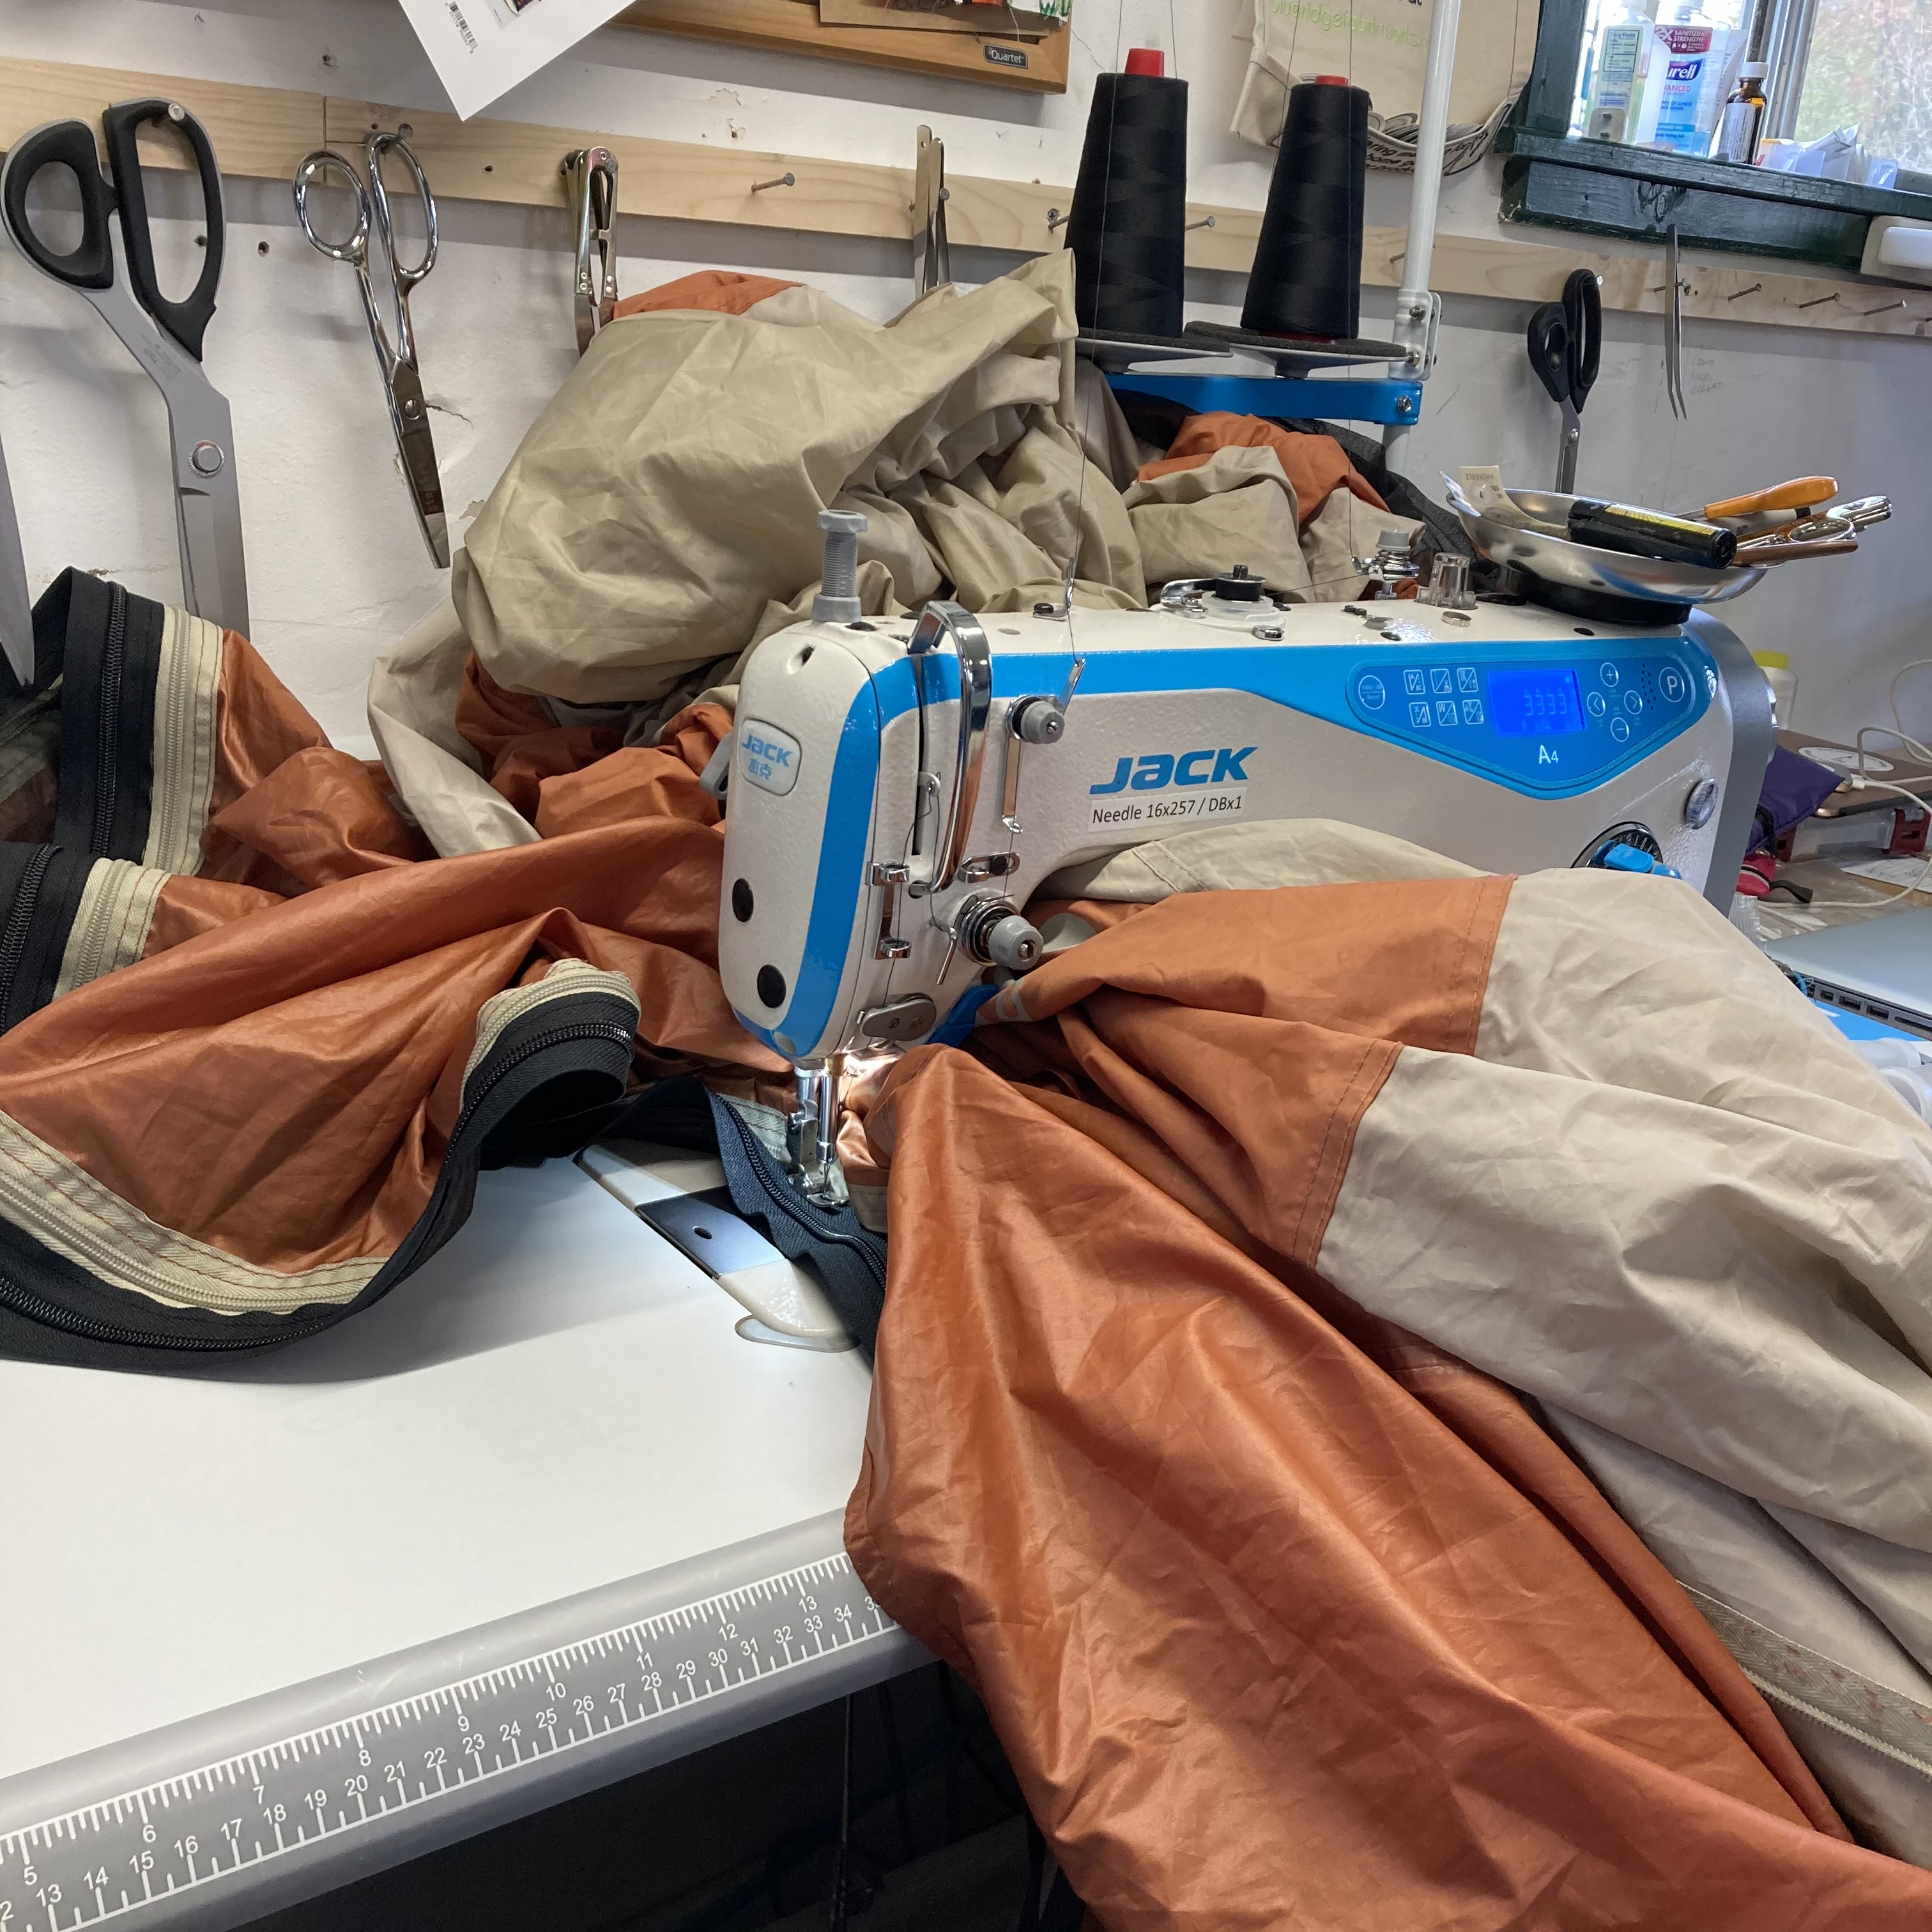 An image of a tan and orange tent under a sewing machine for a zipper replacement.